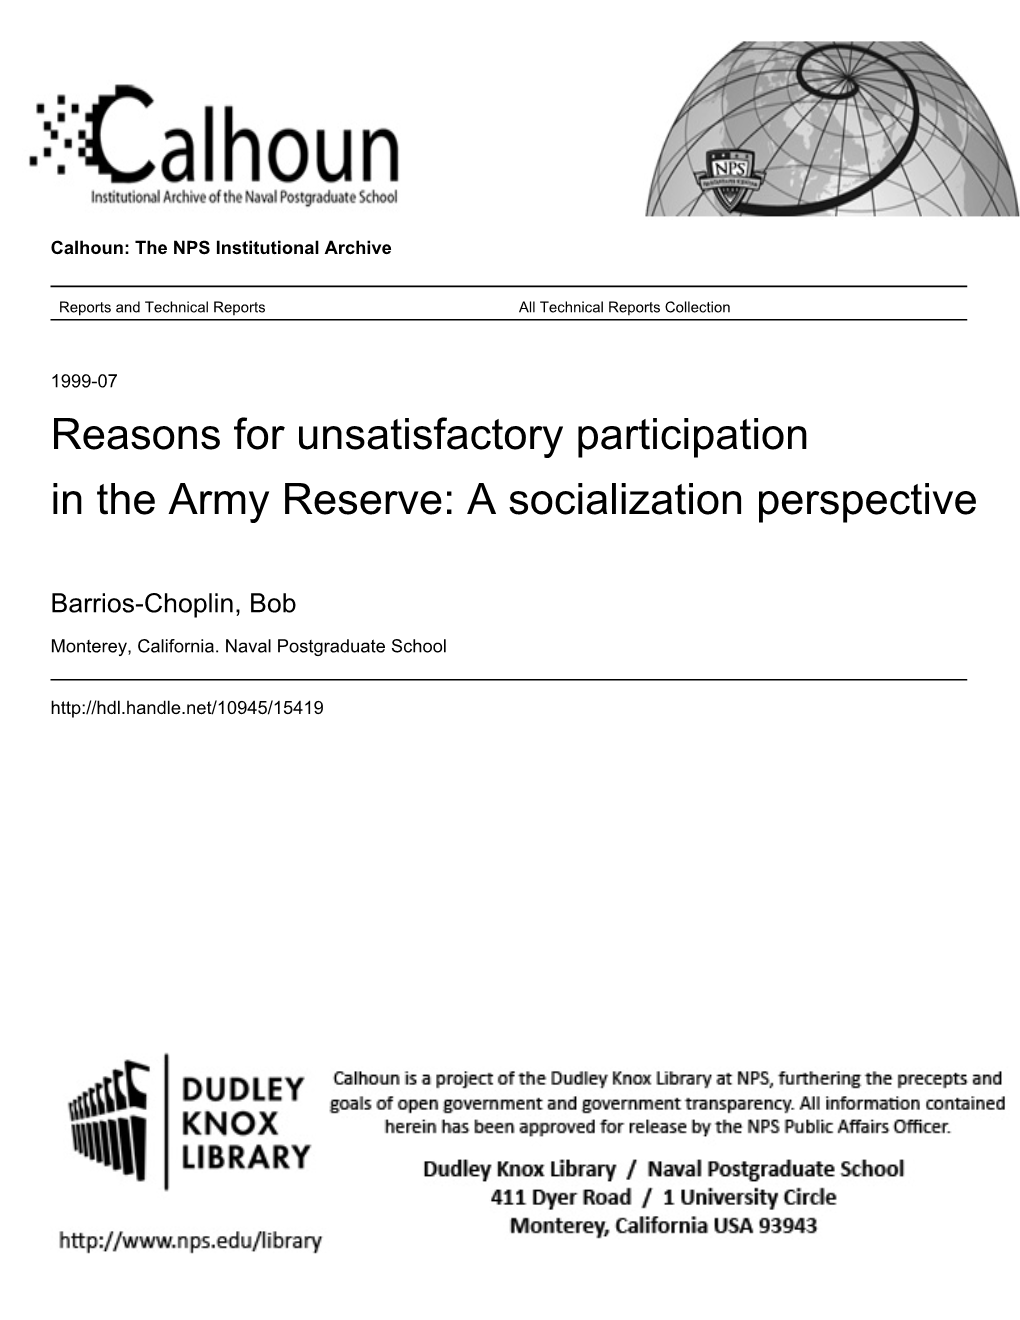 Reasons for Unsatisfactory Participation in the Army Reserve: a Socialization Perspective